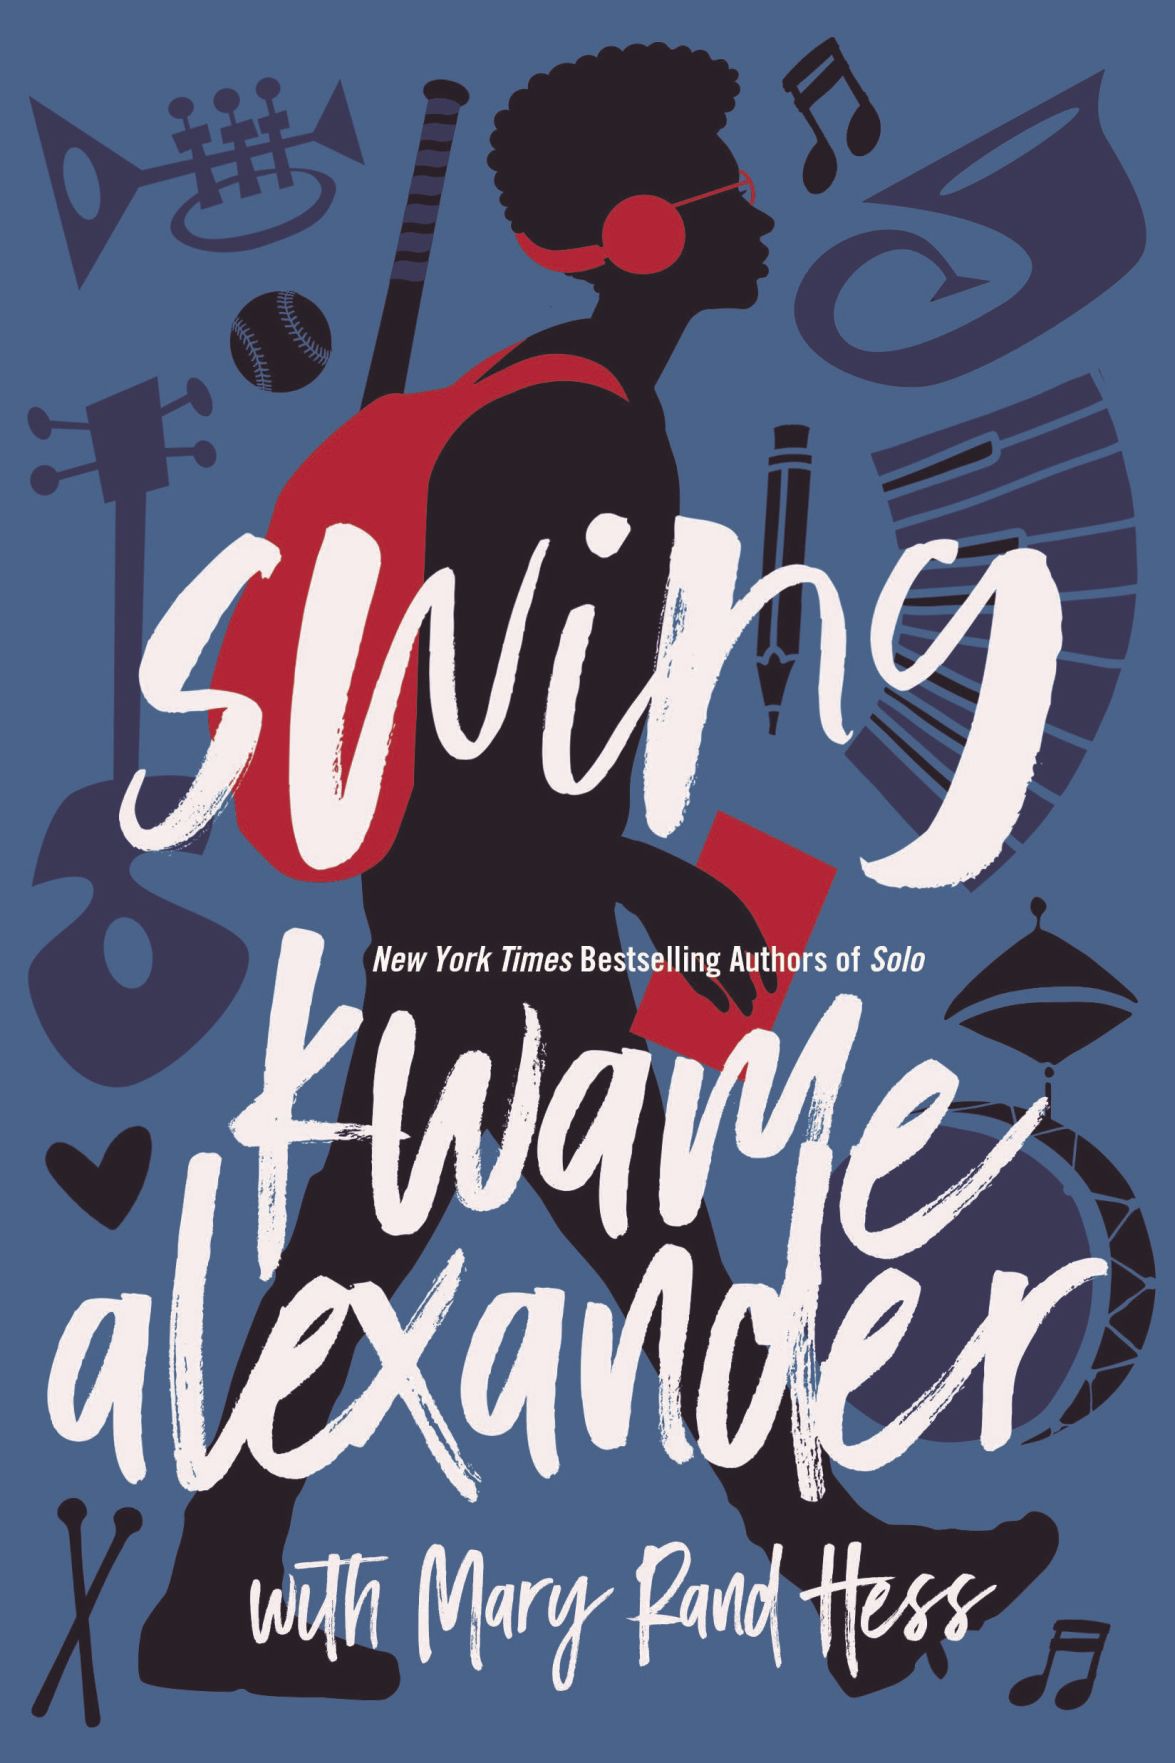 swing book by kwame alexander